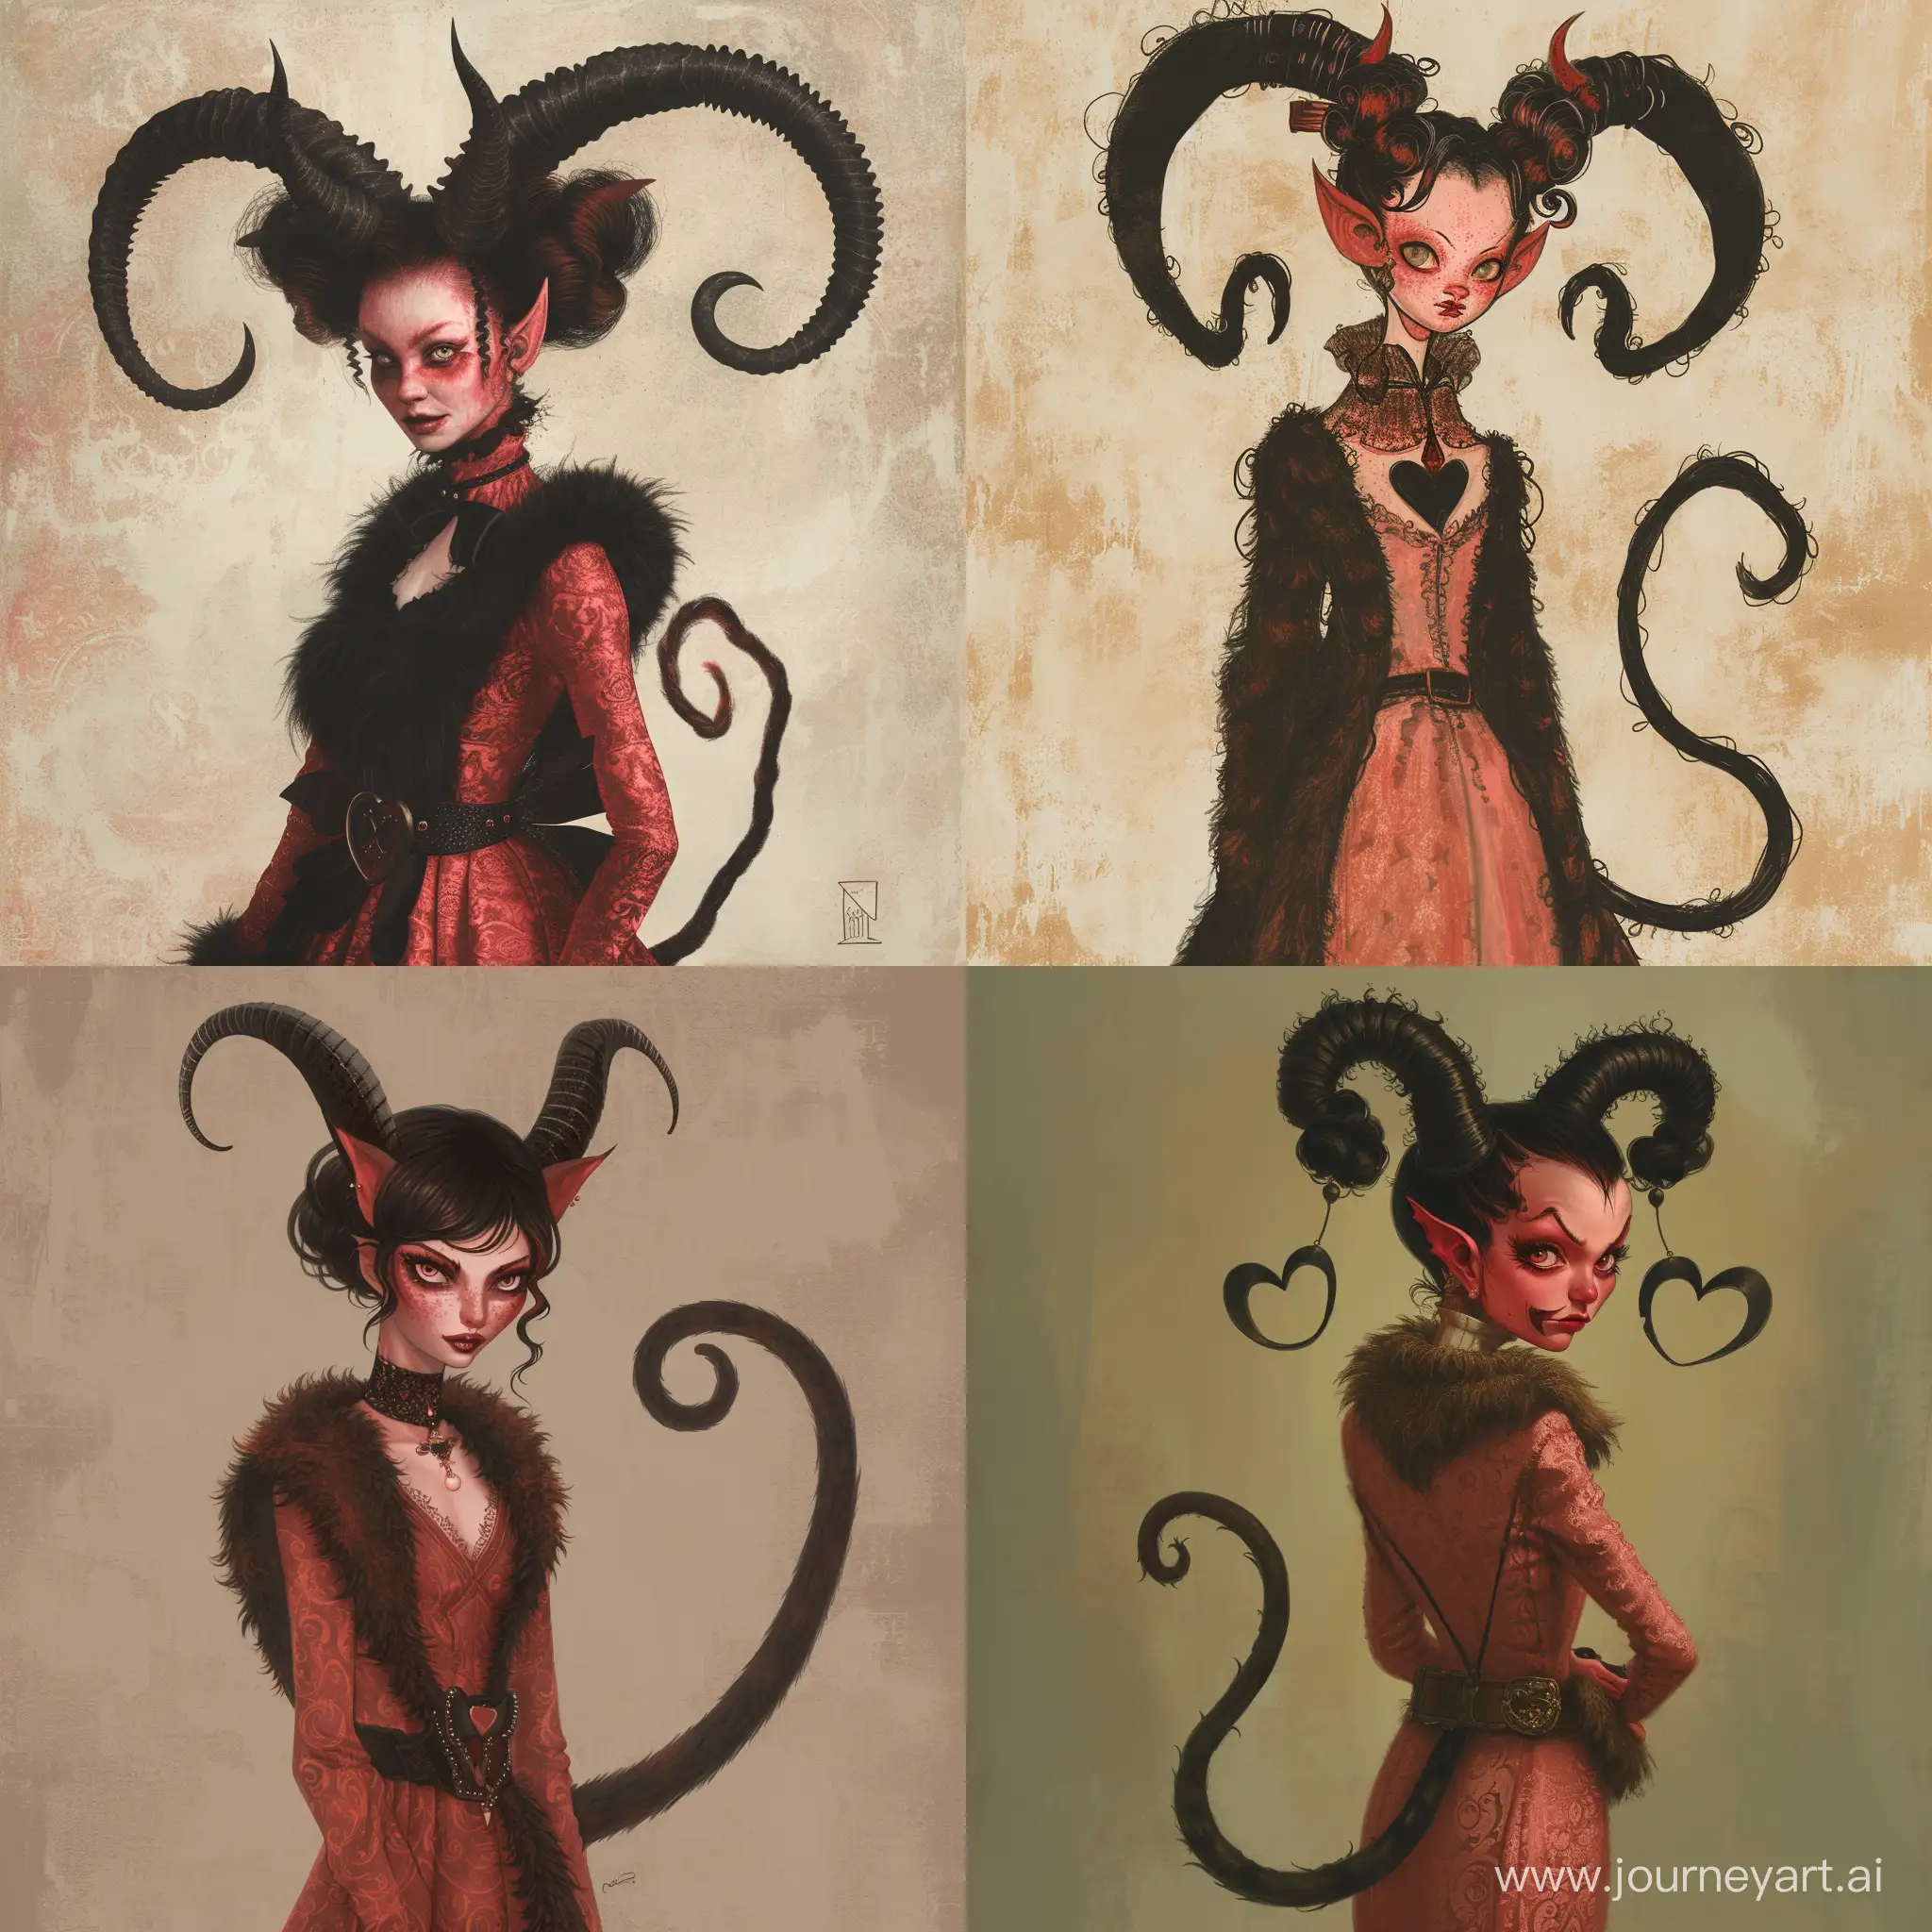 Once in Hell, her demonic form was like a cat-demon with light red skin that was more like a shade of pink, sharp horns that were actually two thick ponytails of black curls, and a long tail that curled into a heart shape at the end, eyes without pupils with fluffy eyelashes, up to 6 feet tall. Dressed in elegant 'showtime' clothes of those time period in combination with a fur coat, and a collar that resembled a belt around the neck (ironizing her comical death), not wanting to change the fashion to something more modernized; against the background of other anthropomorphic demons, she was the closest to a human looking anatomy.